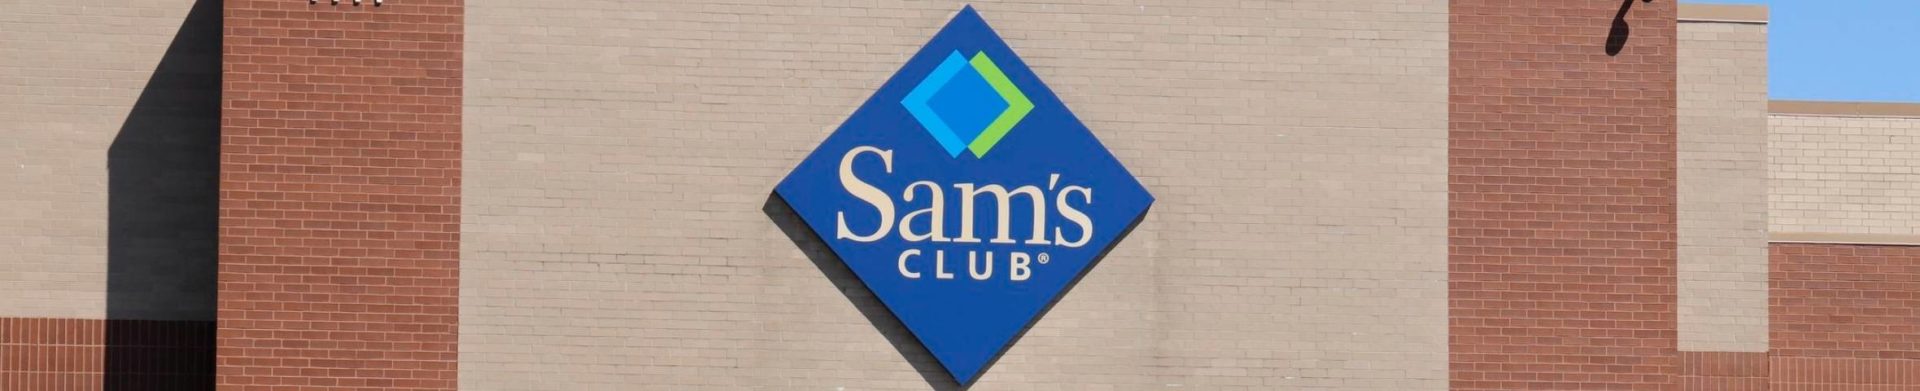 front of a Sam's Club store